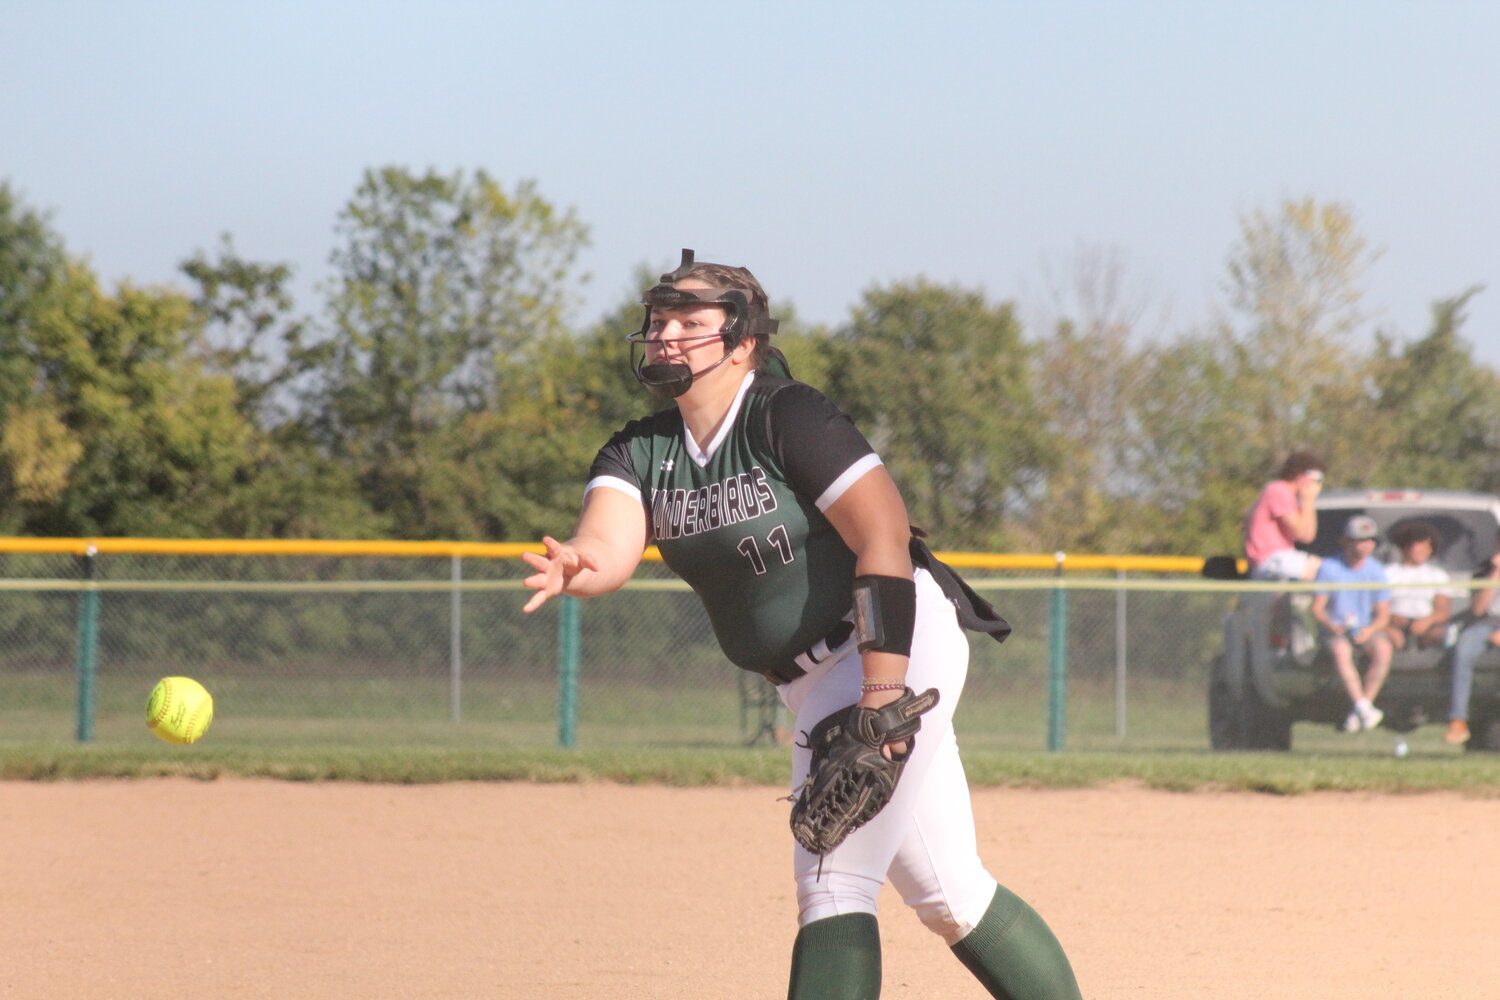 North Callaway junior Lauren Speight pitches during an earlier game this season.